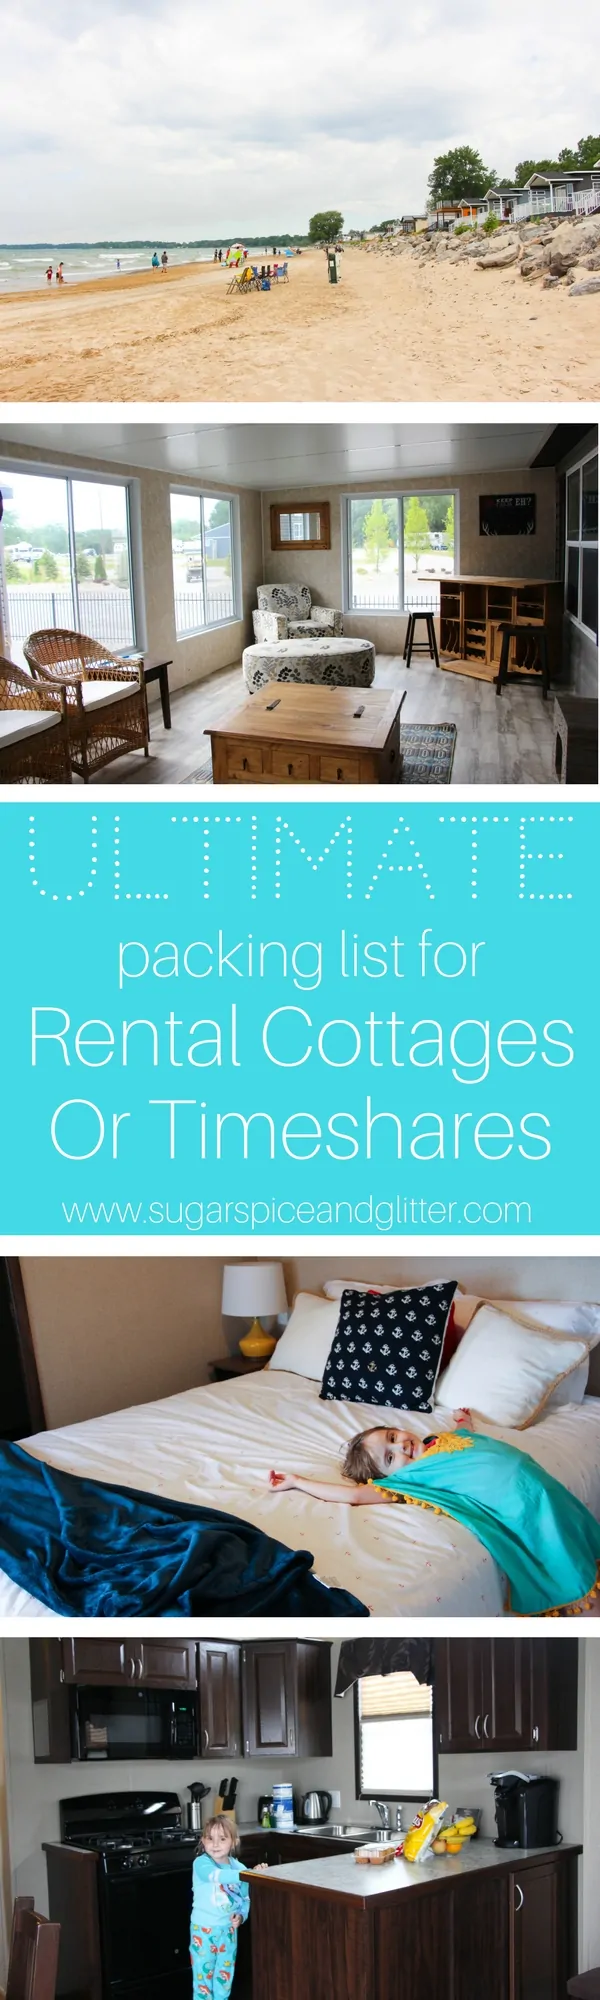 The Ultimate Packing list for Rental Cottages or Timeshares so you can leave for your vacation organized and stay on budget